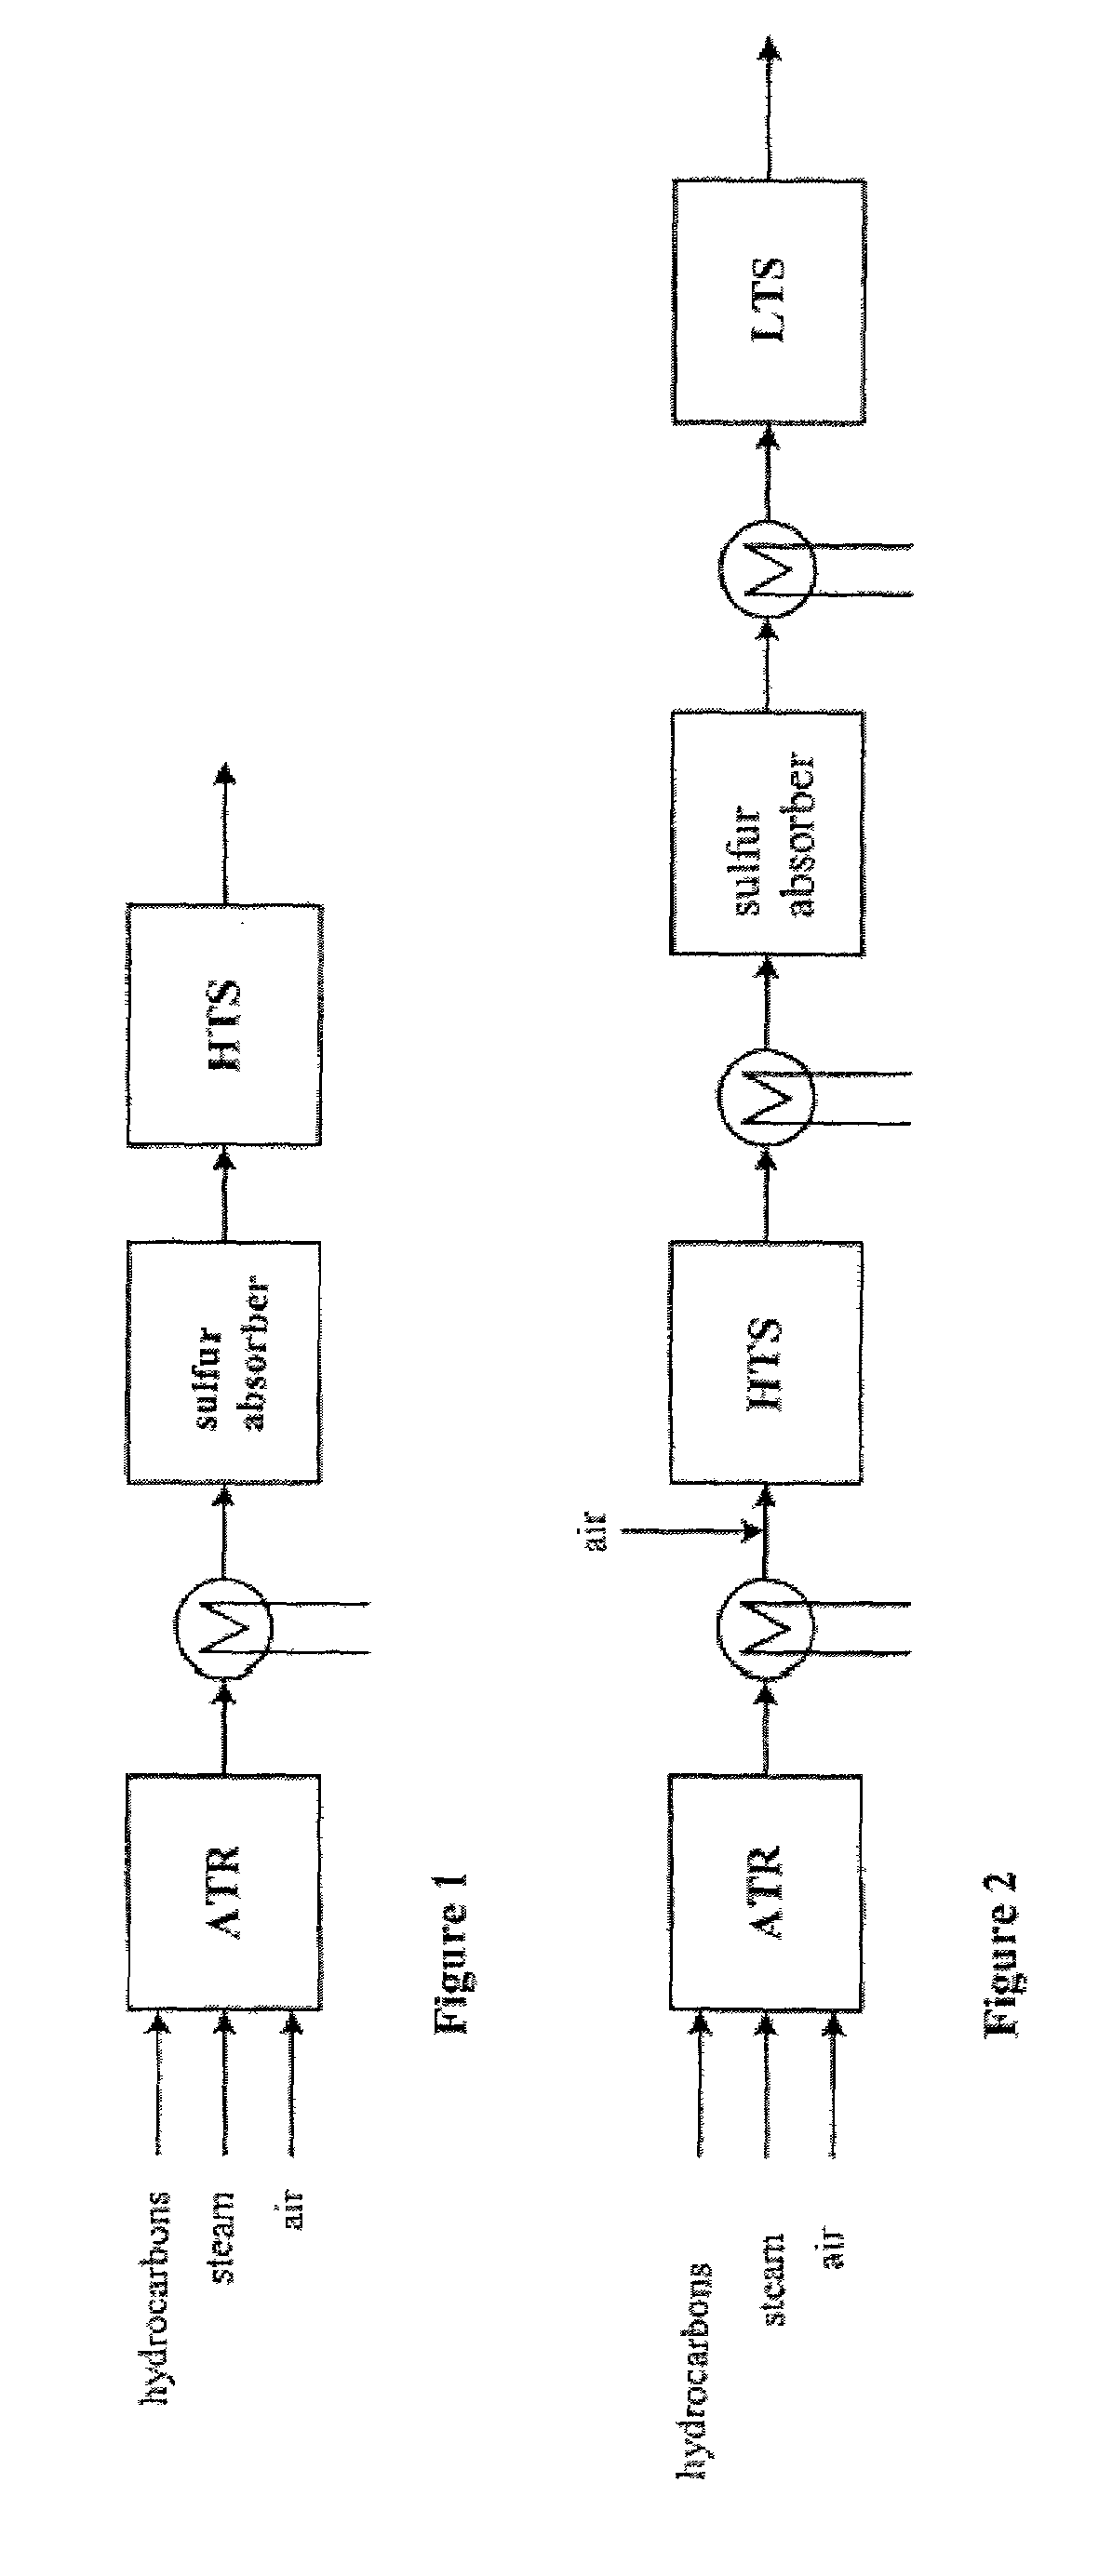 Process for preparing a low-sulfur reformate gas for use in a fuel cell system